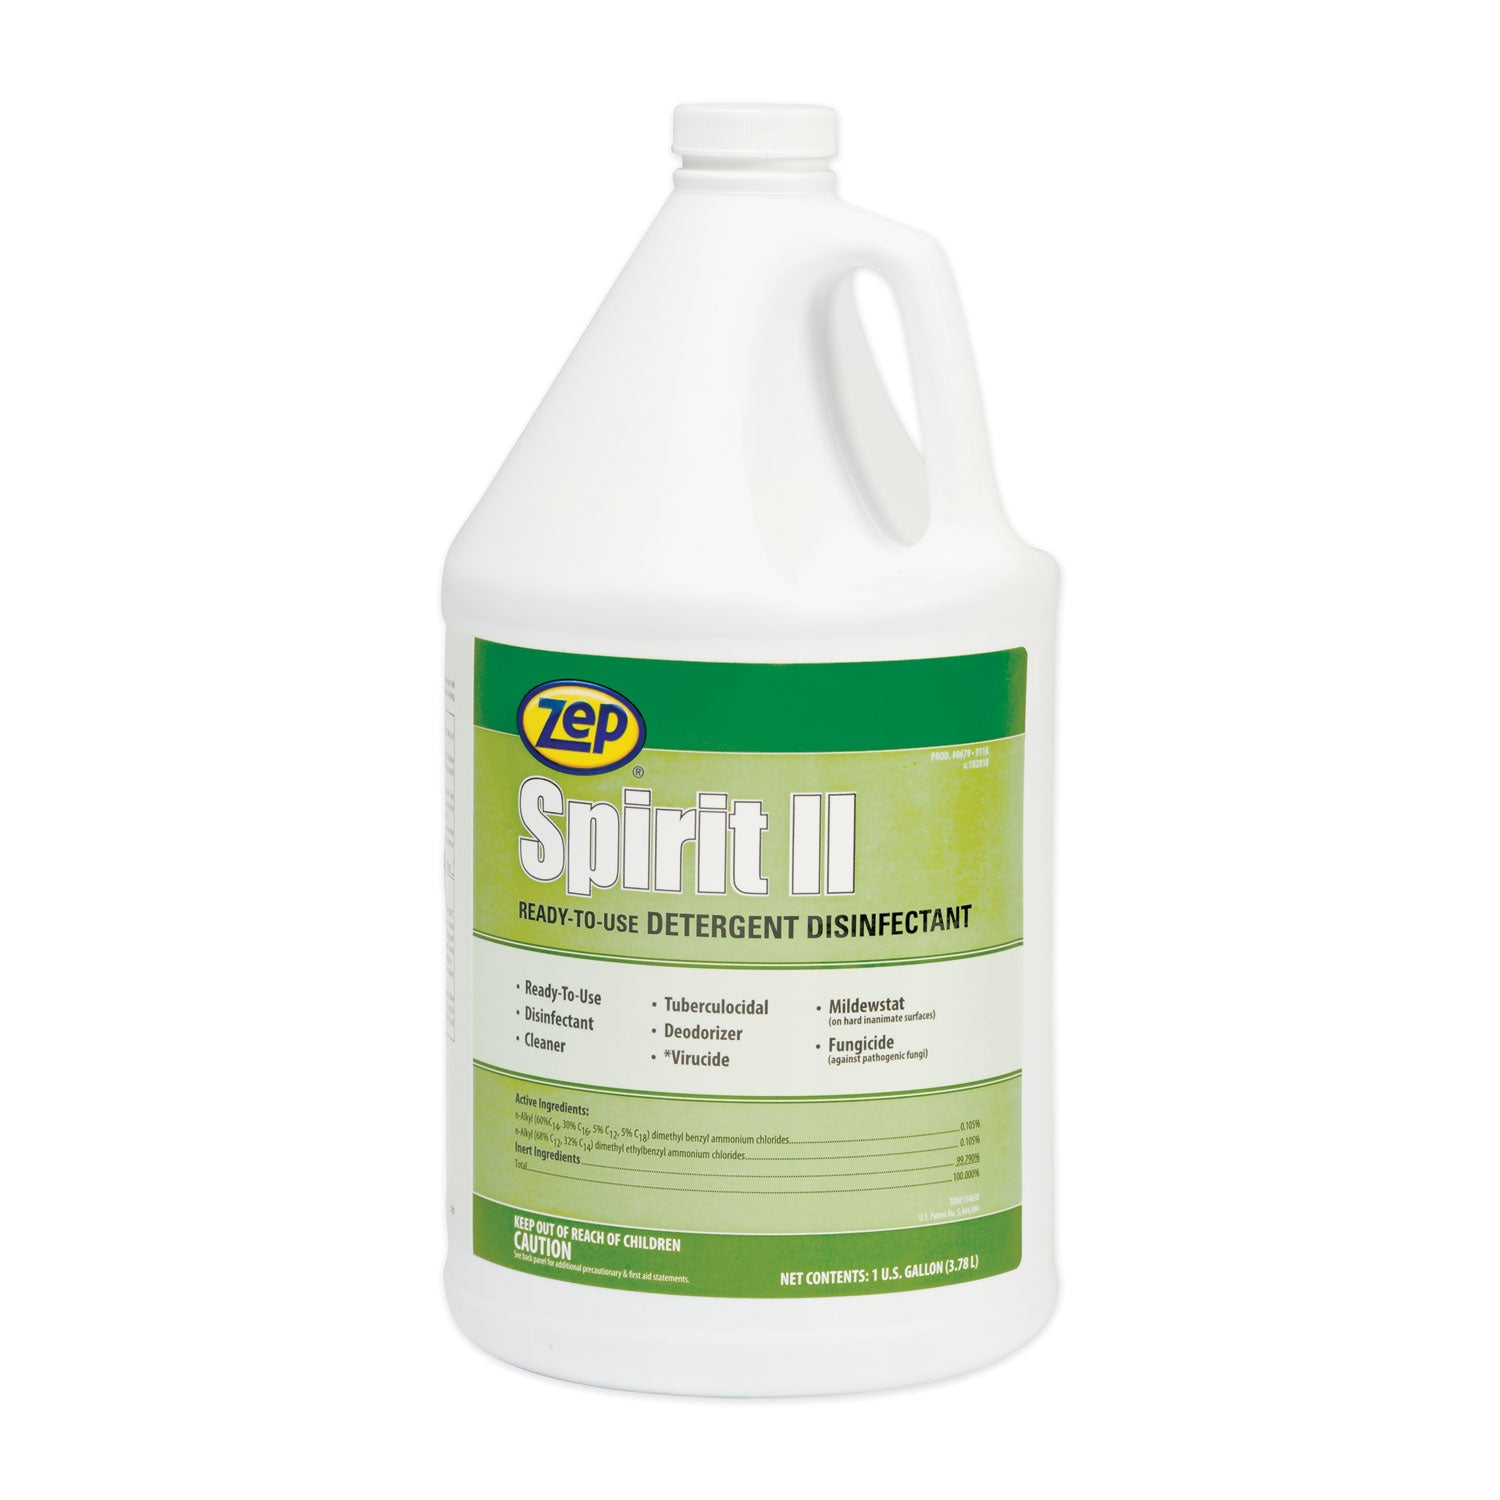 spirit-ii-ready-to-use-disinfectant-citrus-scent-1-gal-bottle-4-carton_zpp67923 - 1